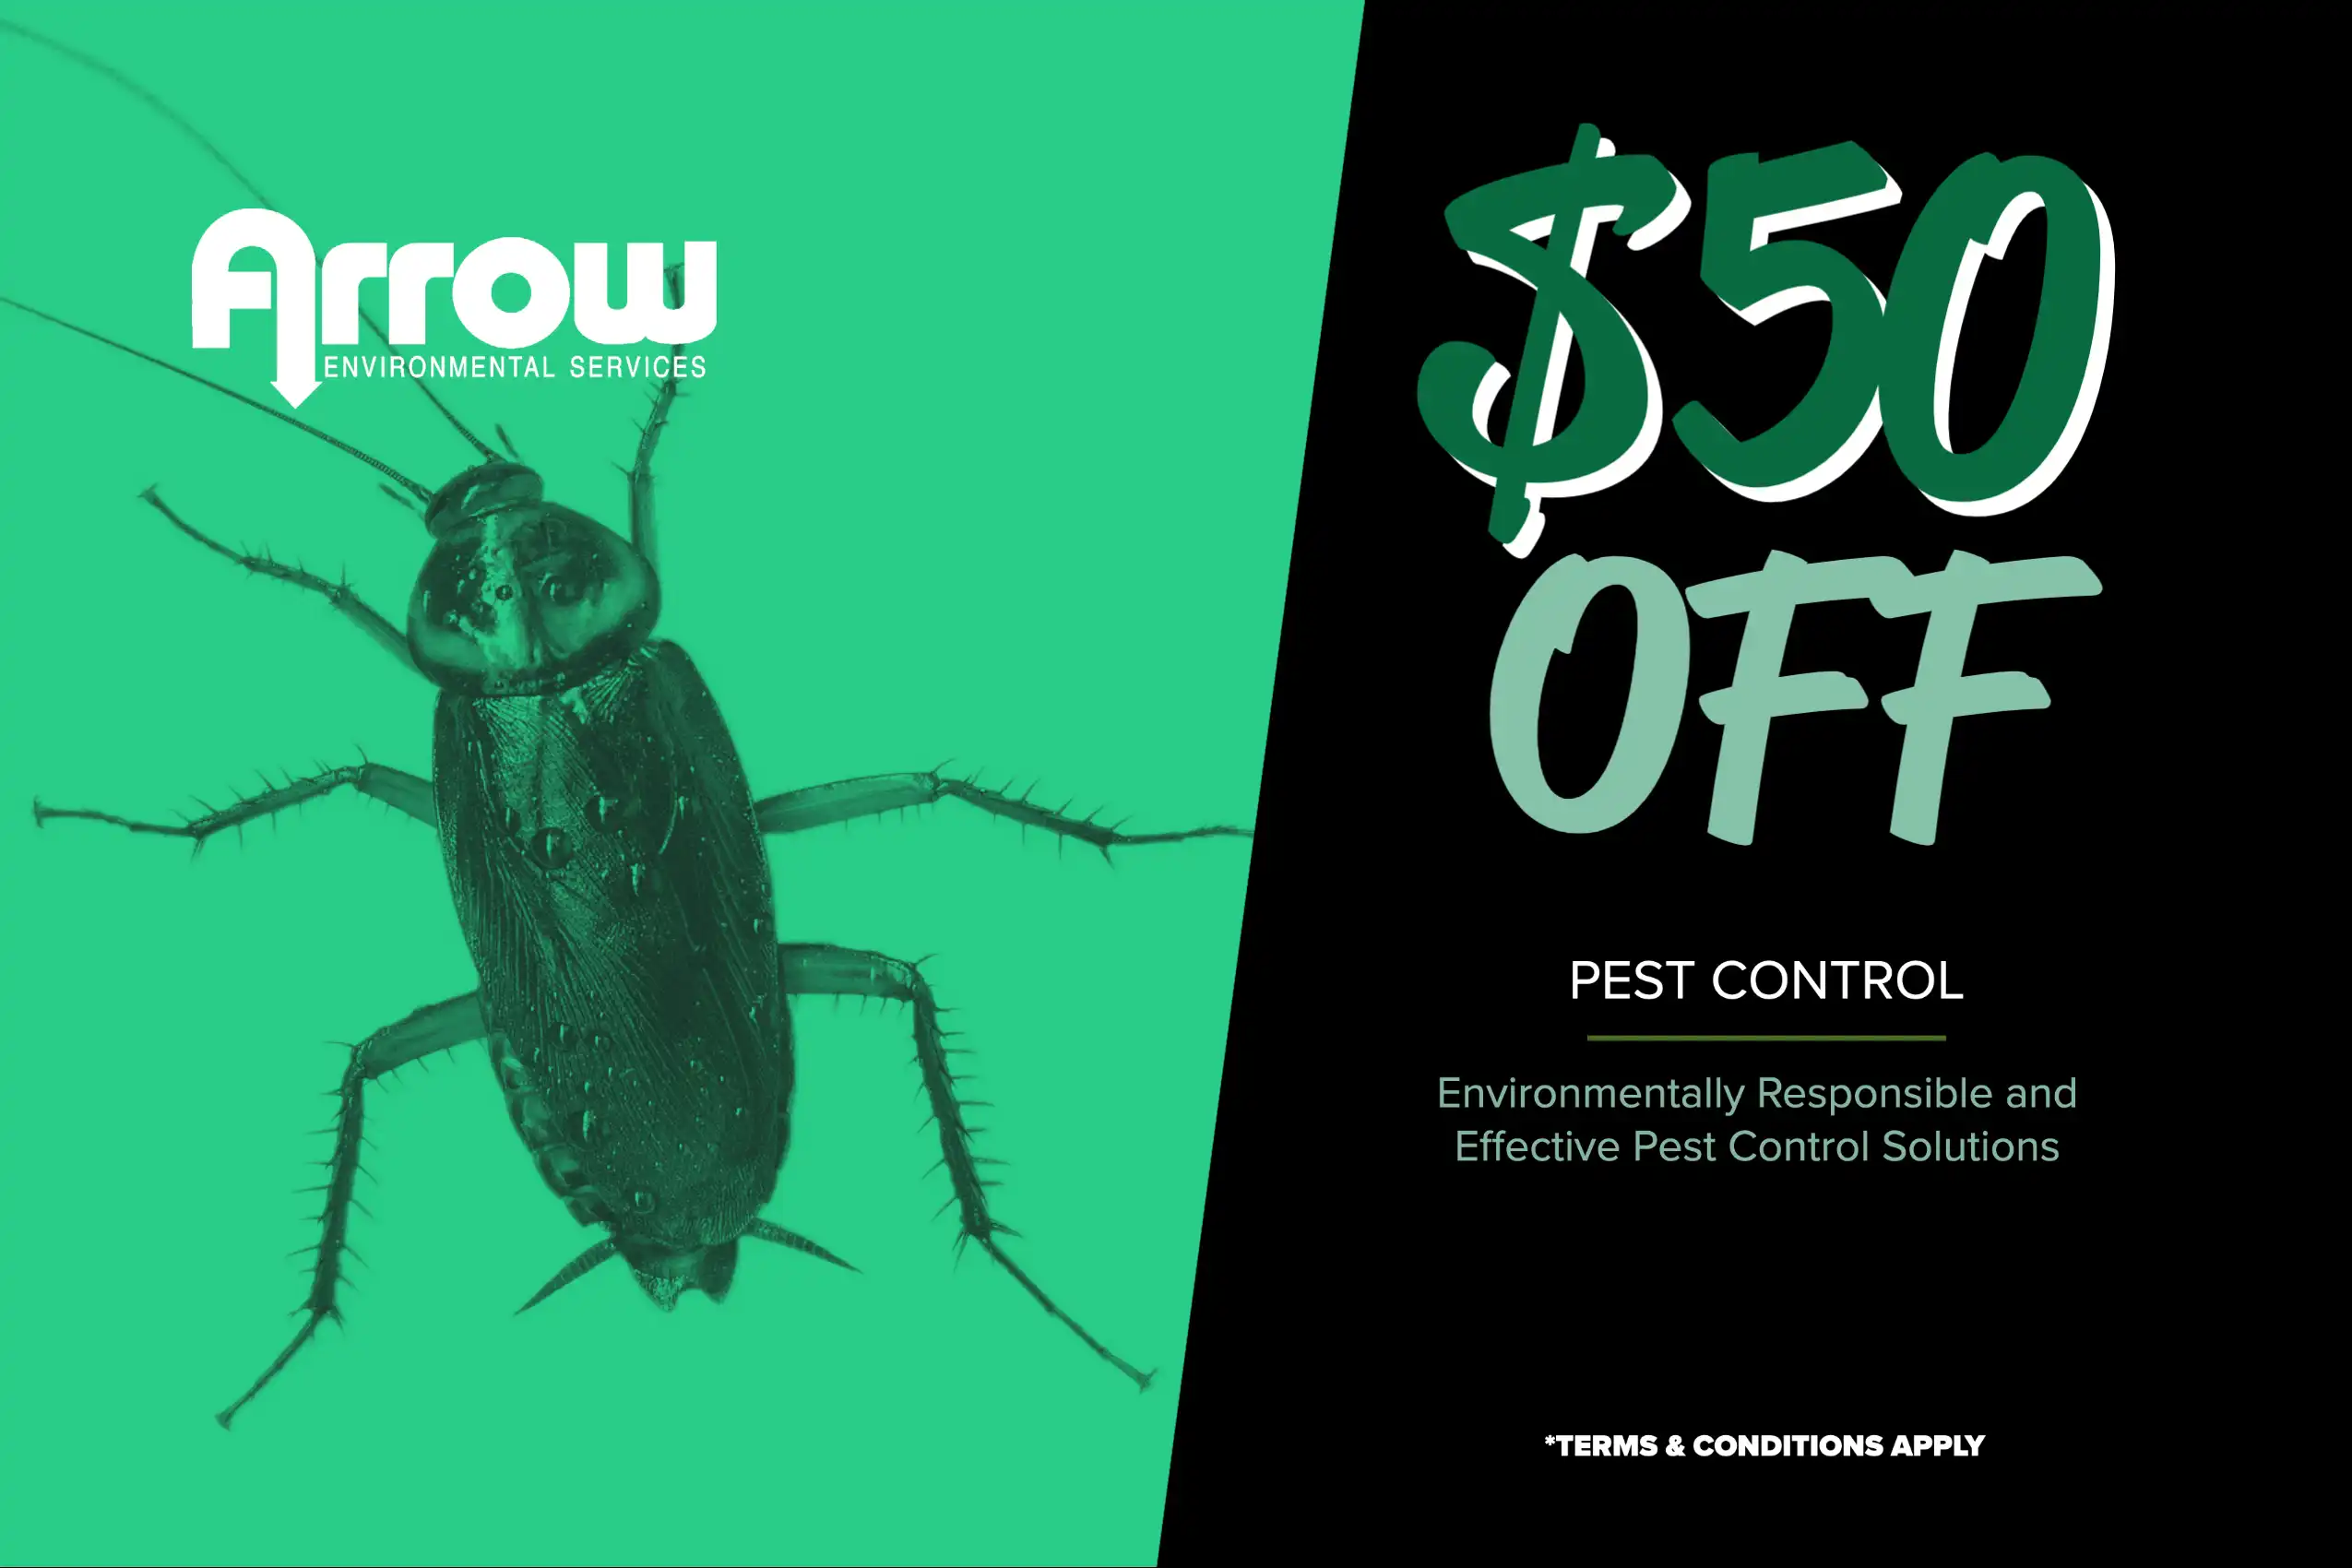 $50 off coupon for pest conrol